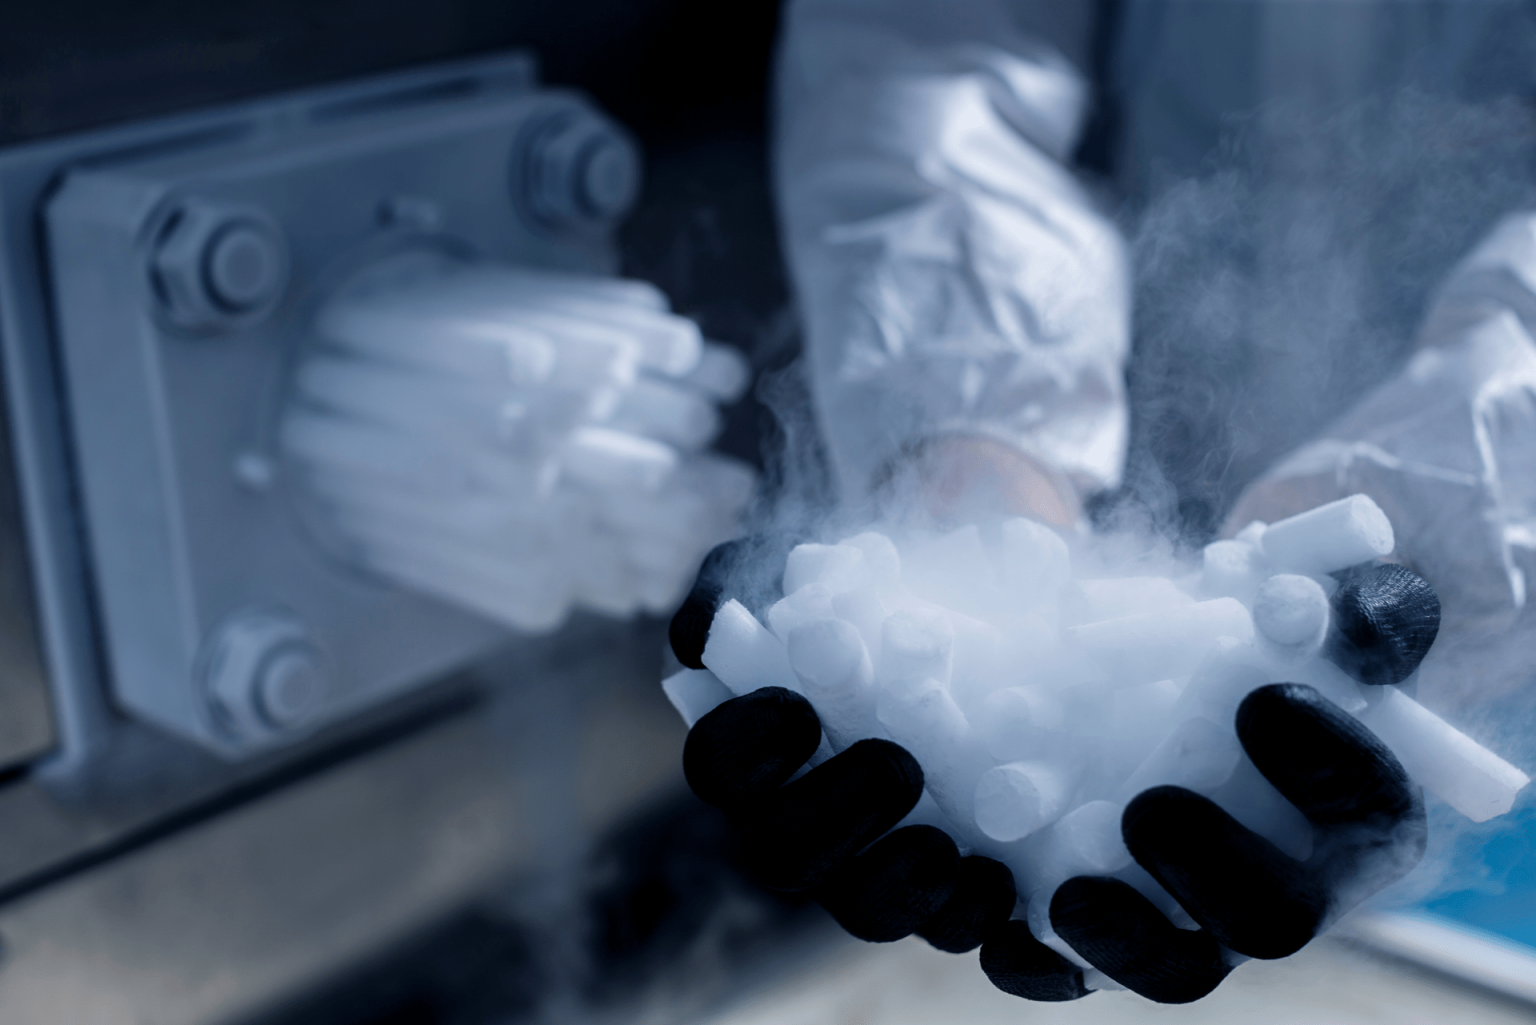 Dry Ice Handling and Storage Safety Tips